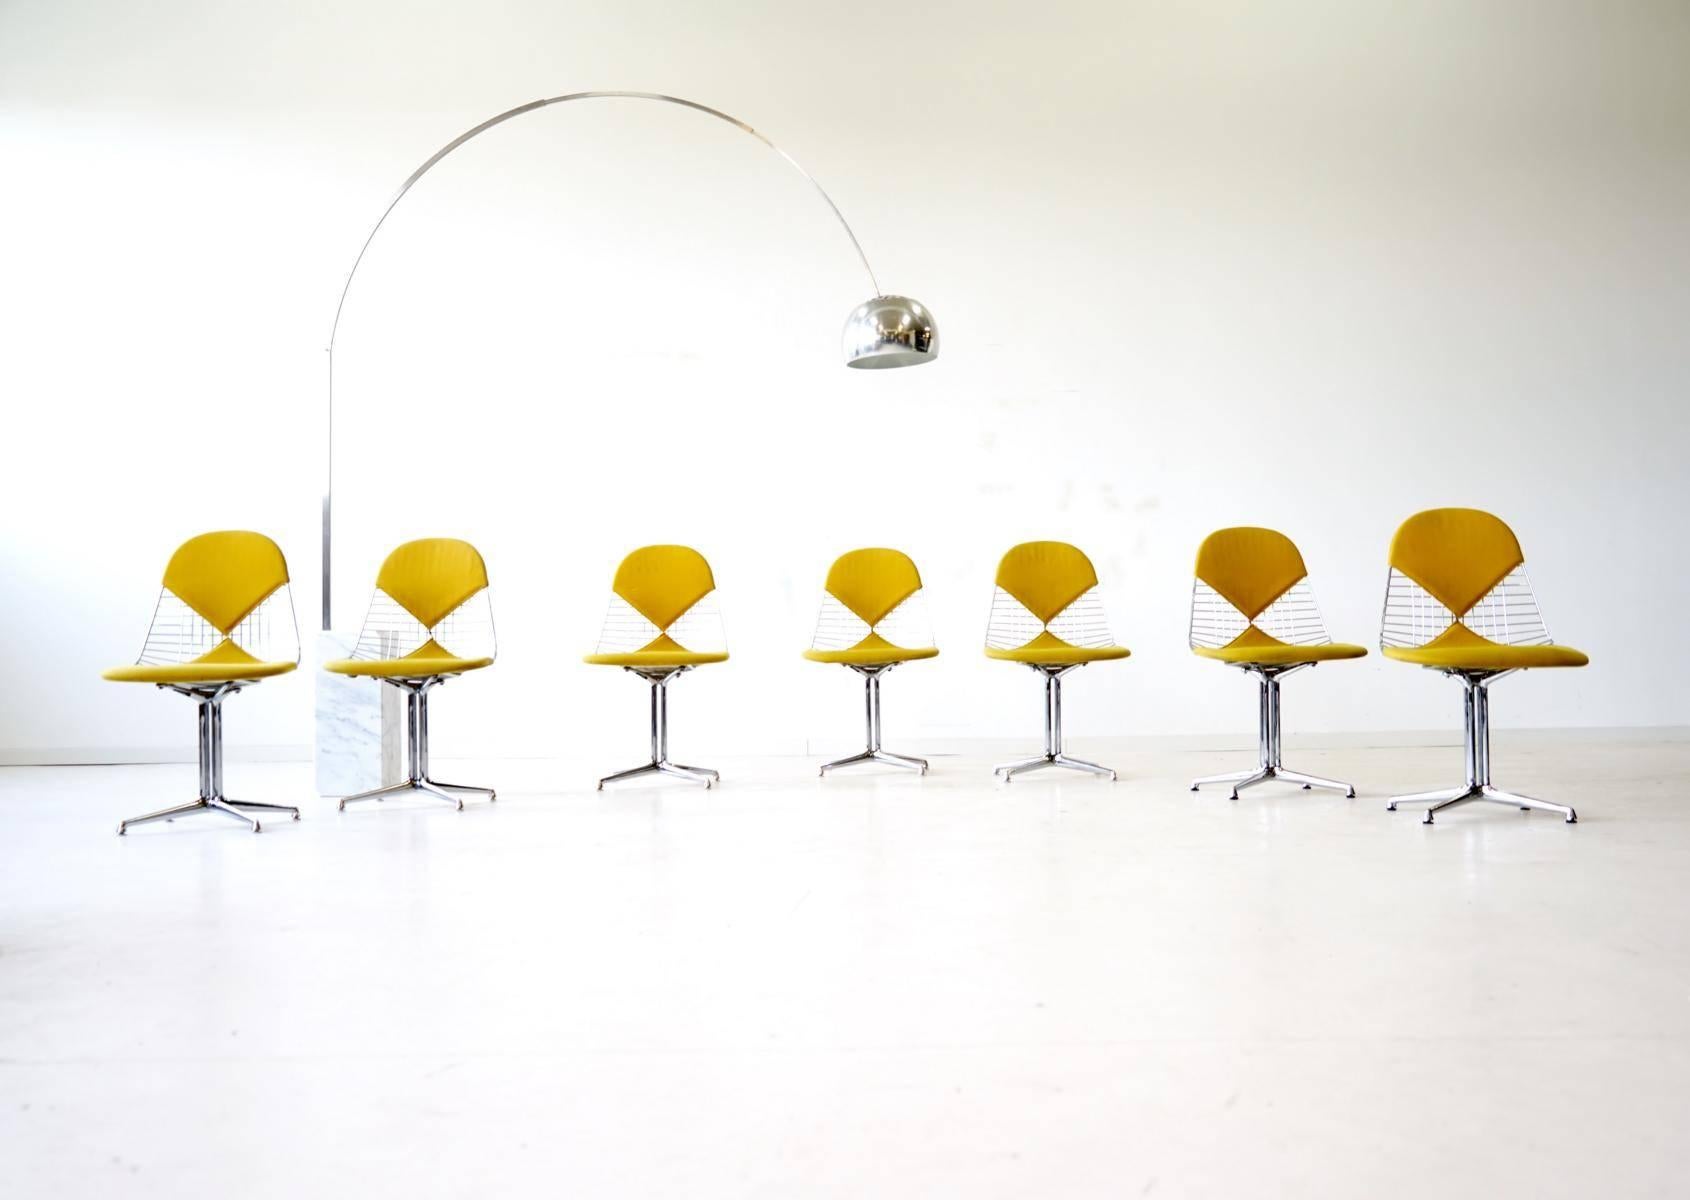 Set of four Eames wire side bikini chair Herman Miller La Fonda base
La Fonda base, chrome. Original condition. Original yellow fabric from Herman Miller. The ideal chairs for the kitchen, dining room, meeting room, etc. Very comfortable. The